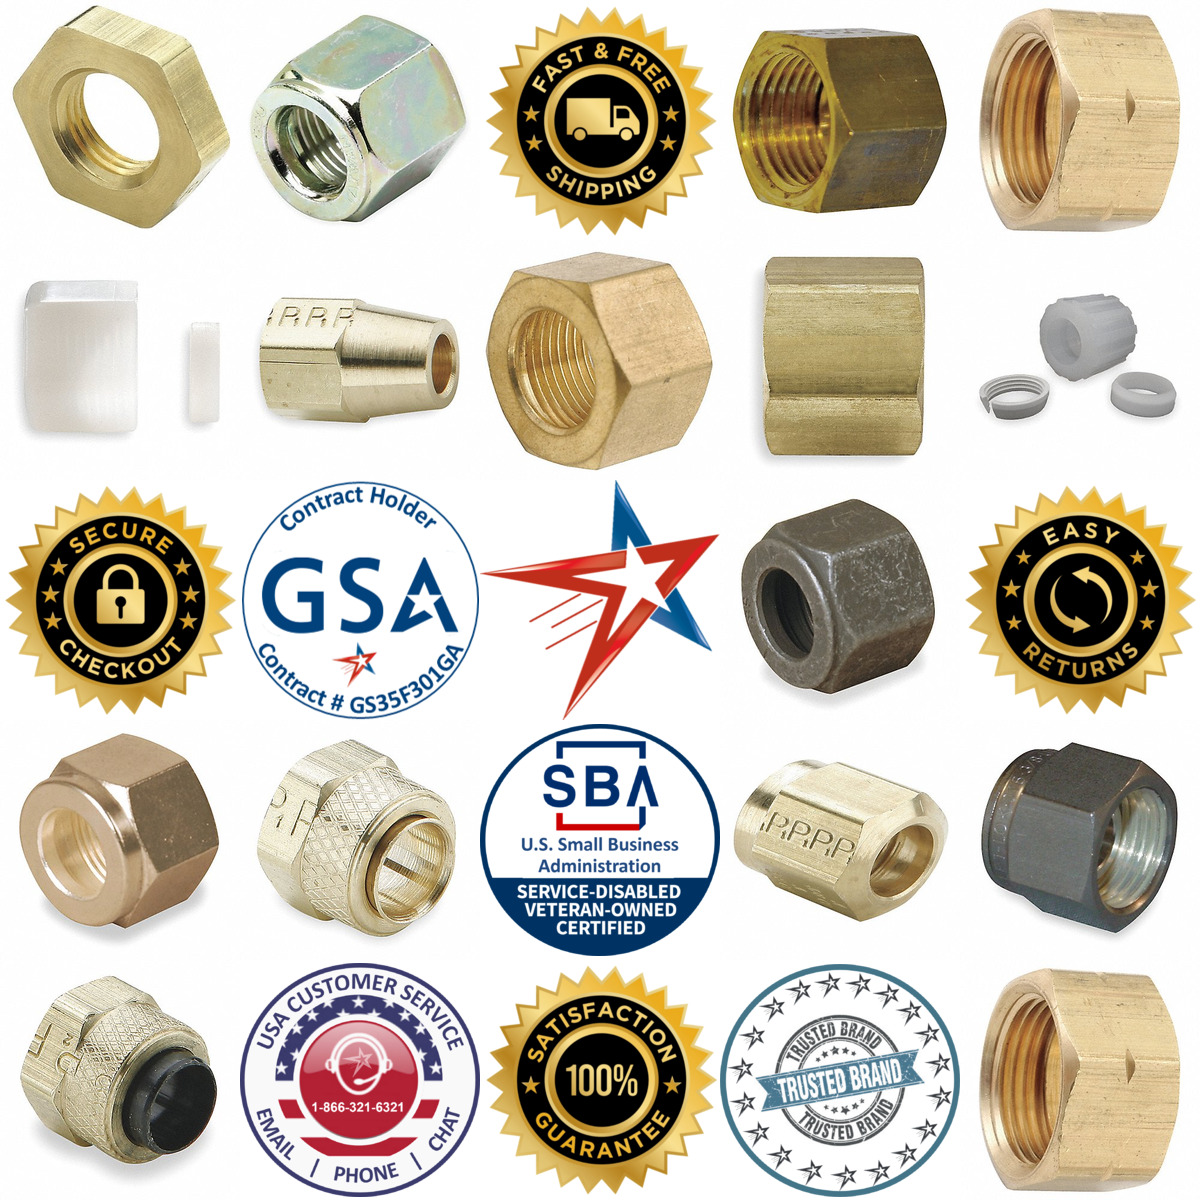 A selection of Compression Fitting Nuts products on GoVets